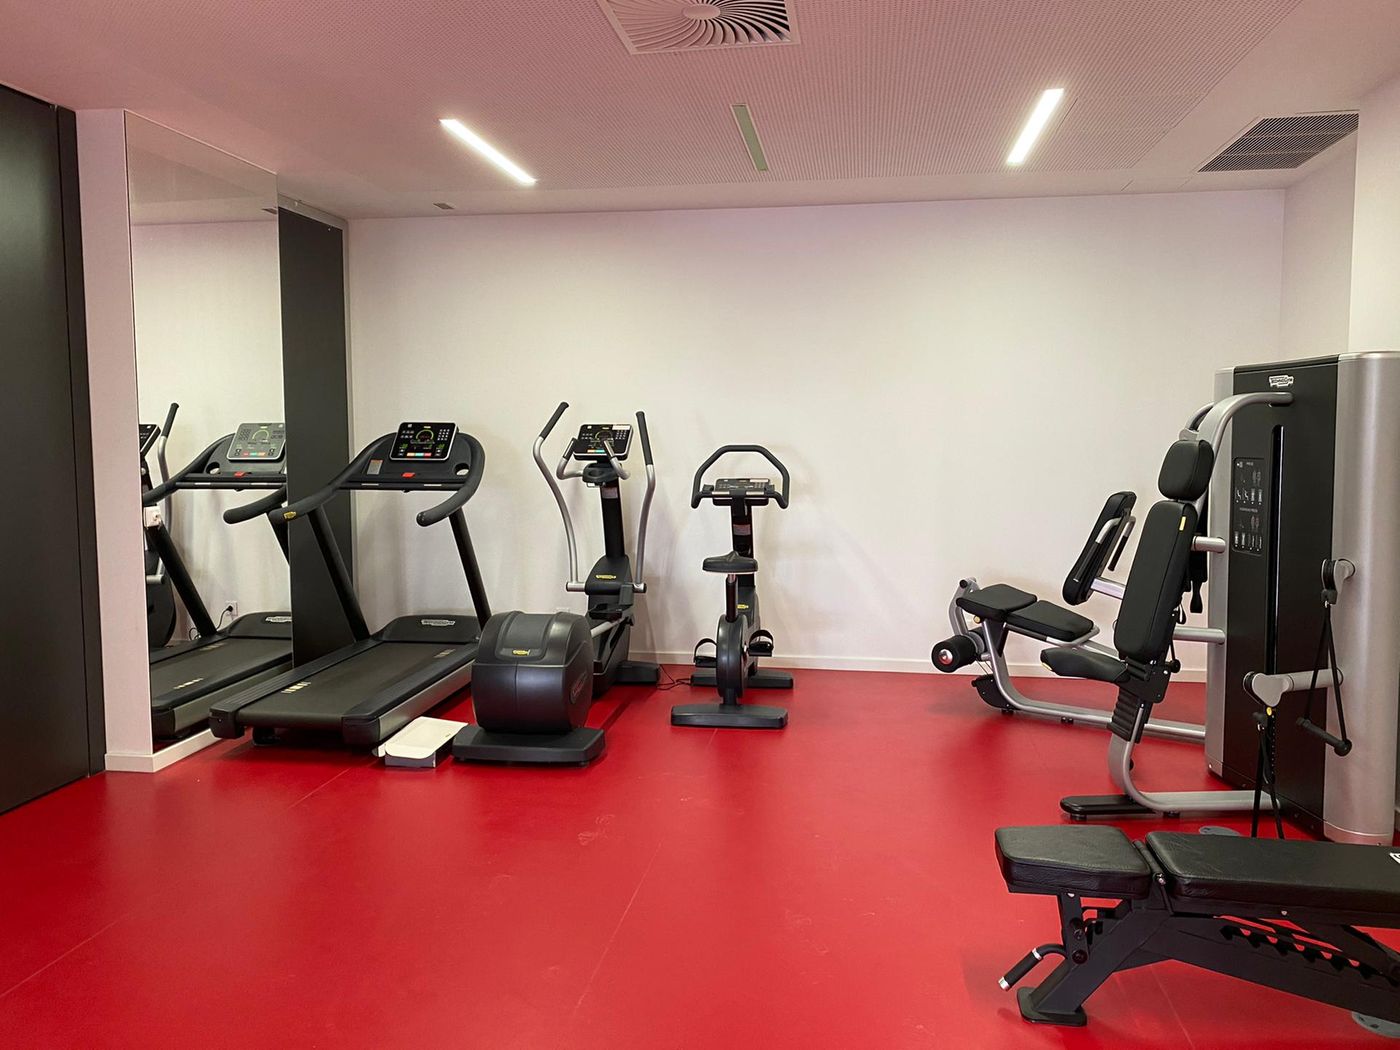 Gym in student apartment building in Lisbon, Portugal.